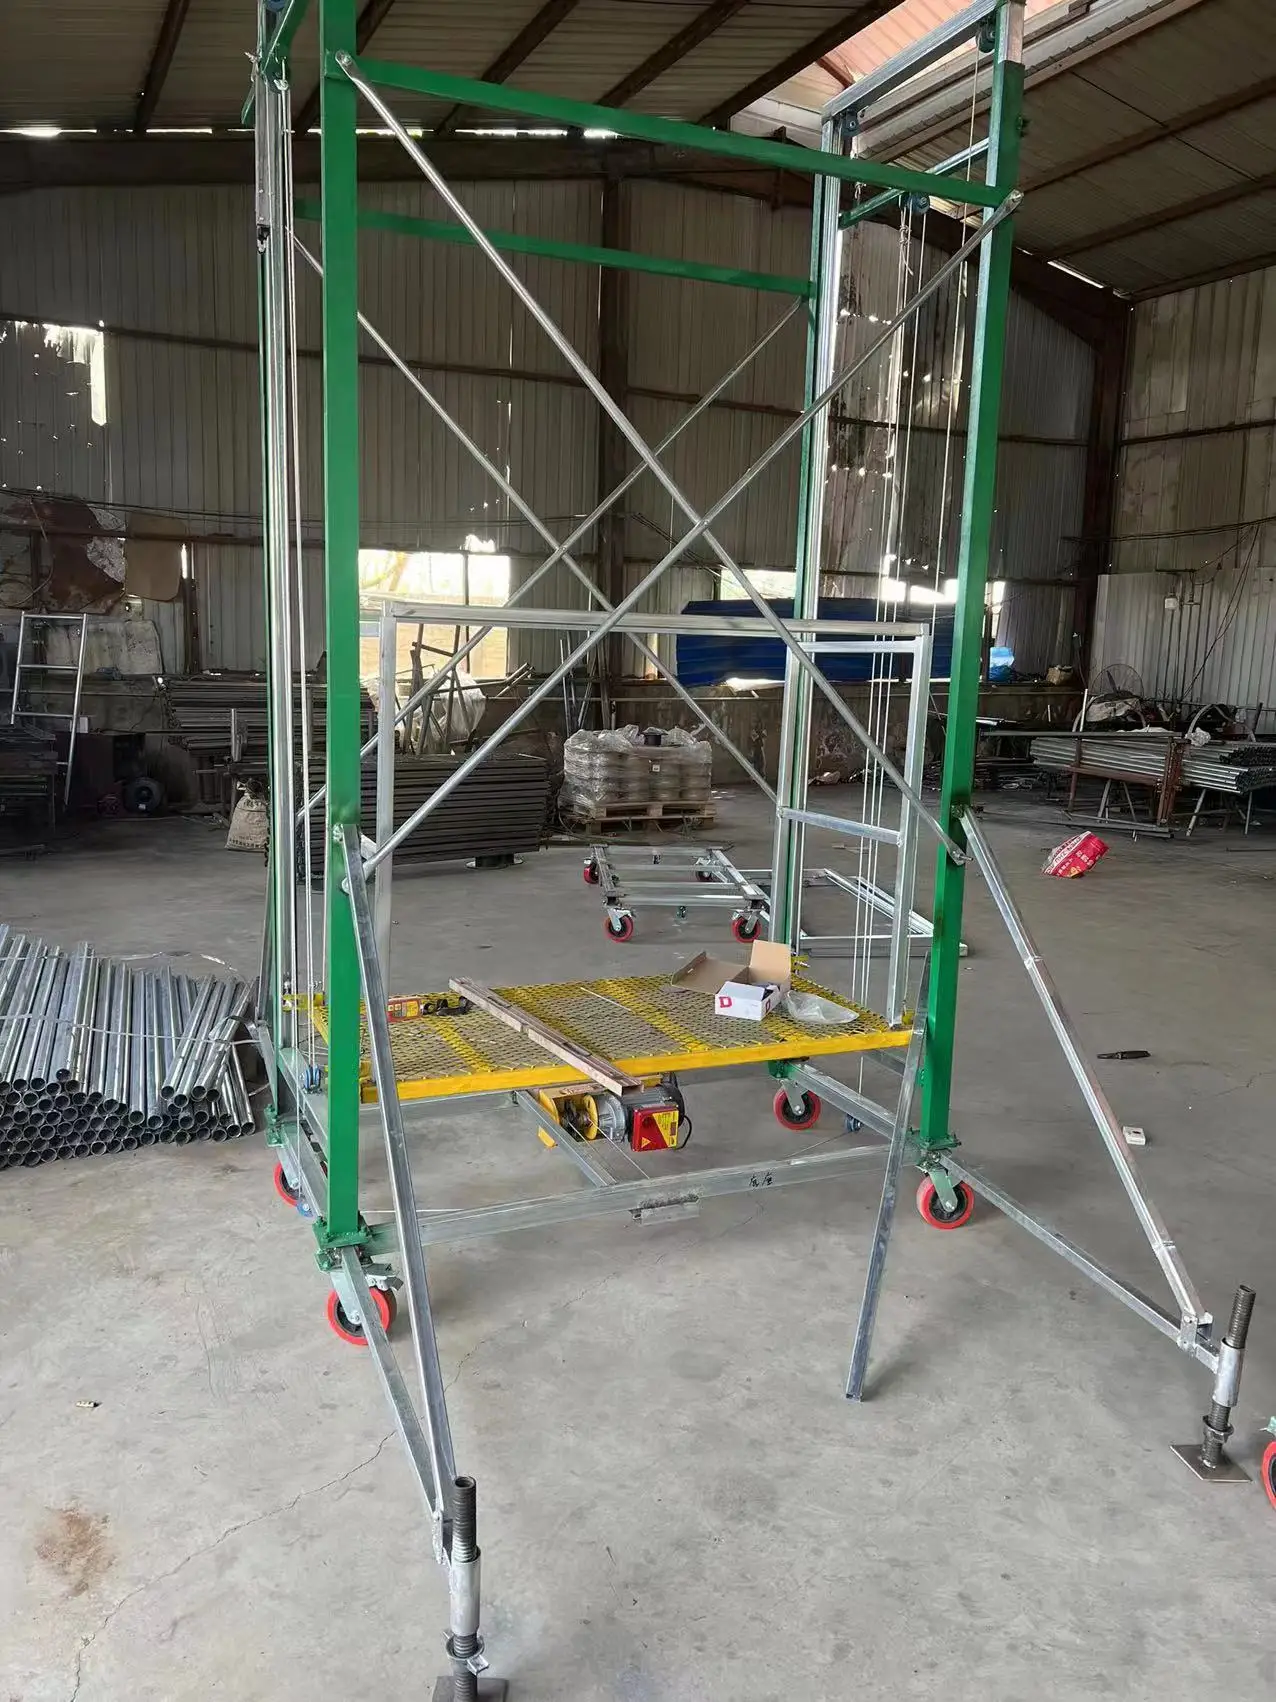 2m-6m mobile folding electric scaffolding can be remotely controlled